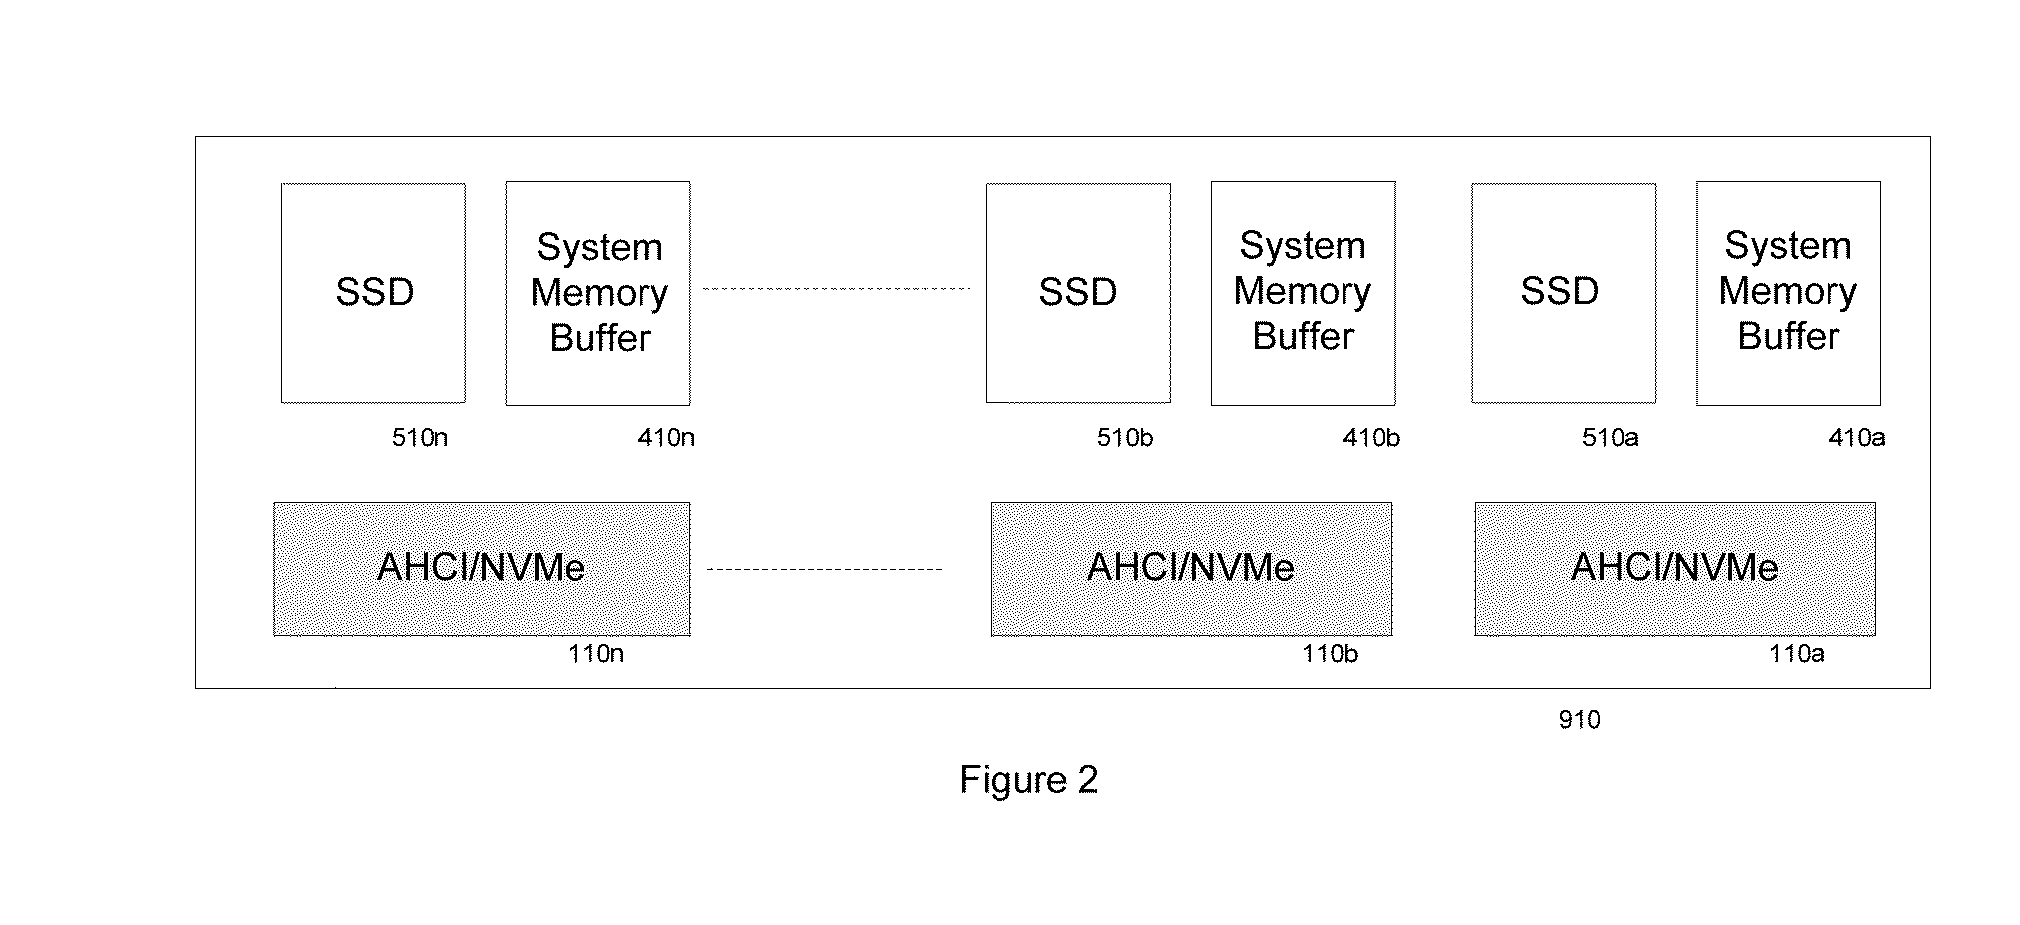 METHOD OF DIRECT CONNECTING AHCI OR NVMe BASED SSD SYSTEM TO COMPUTER SYSTEM MEMORY BUS